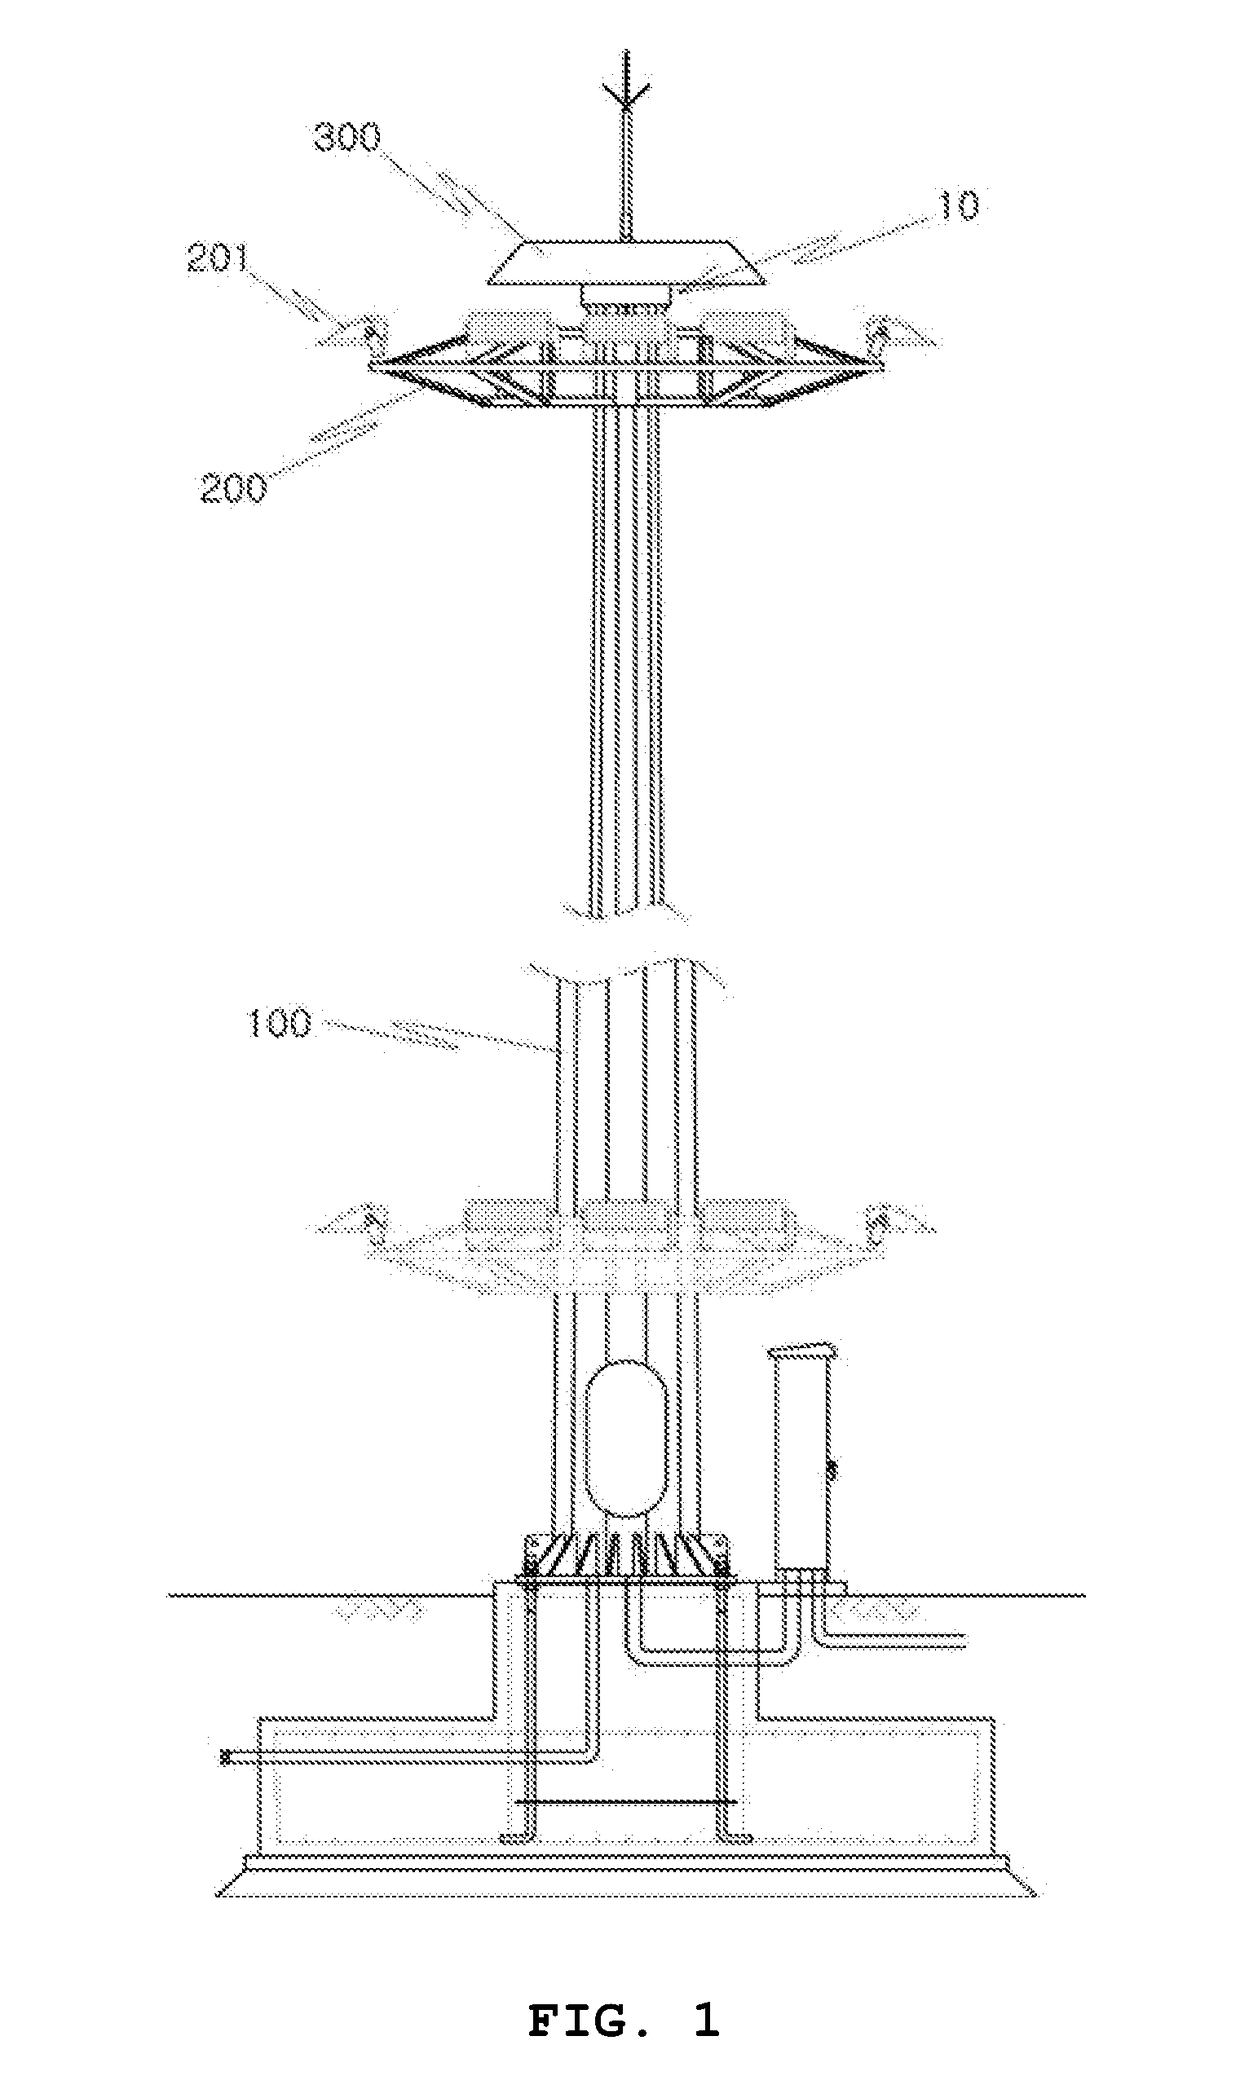 Earthquake-resistant light tower with the tuned mass damper